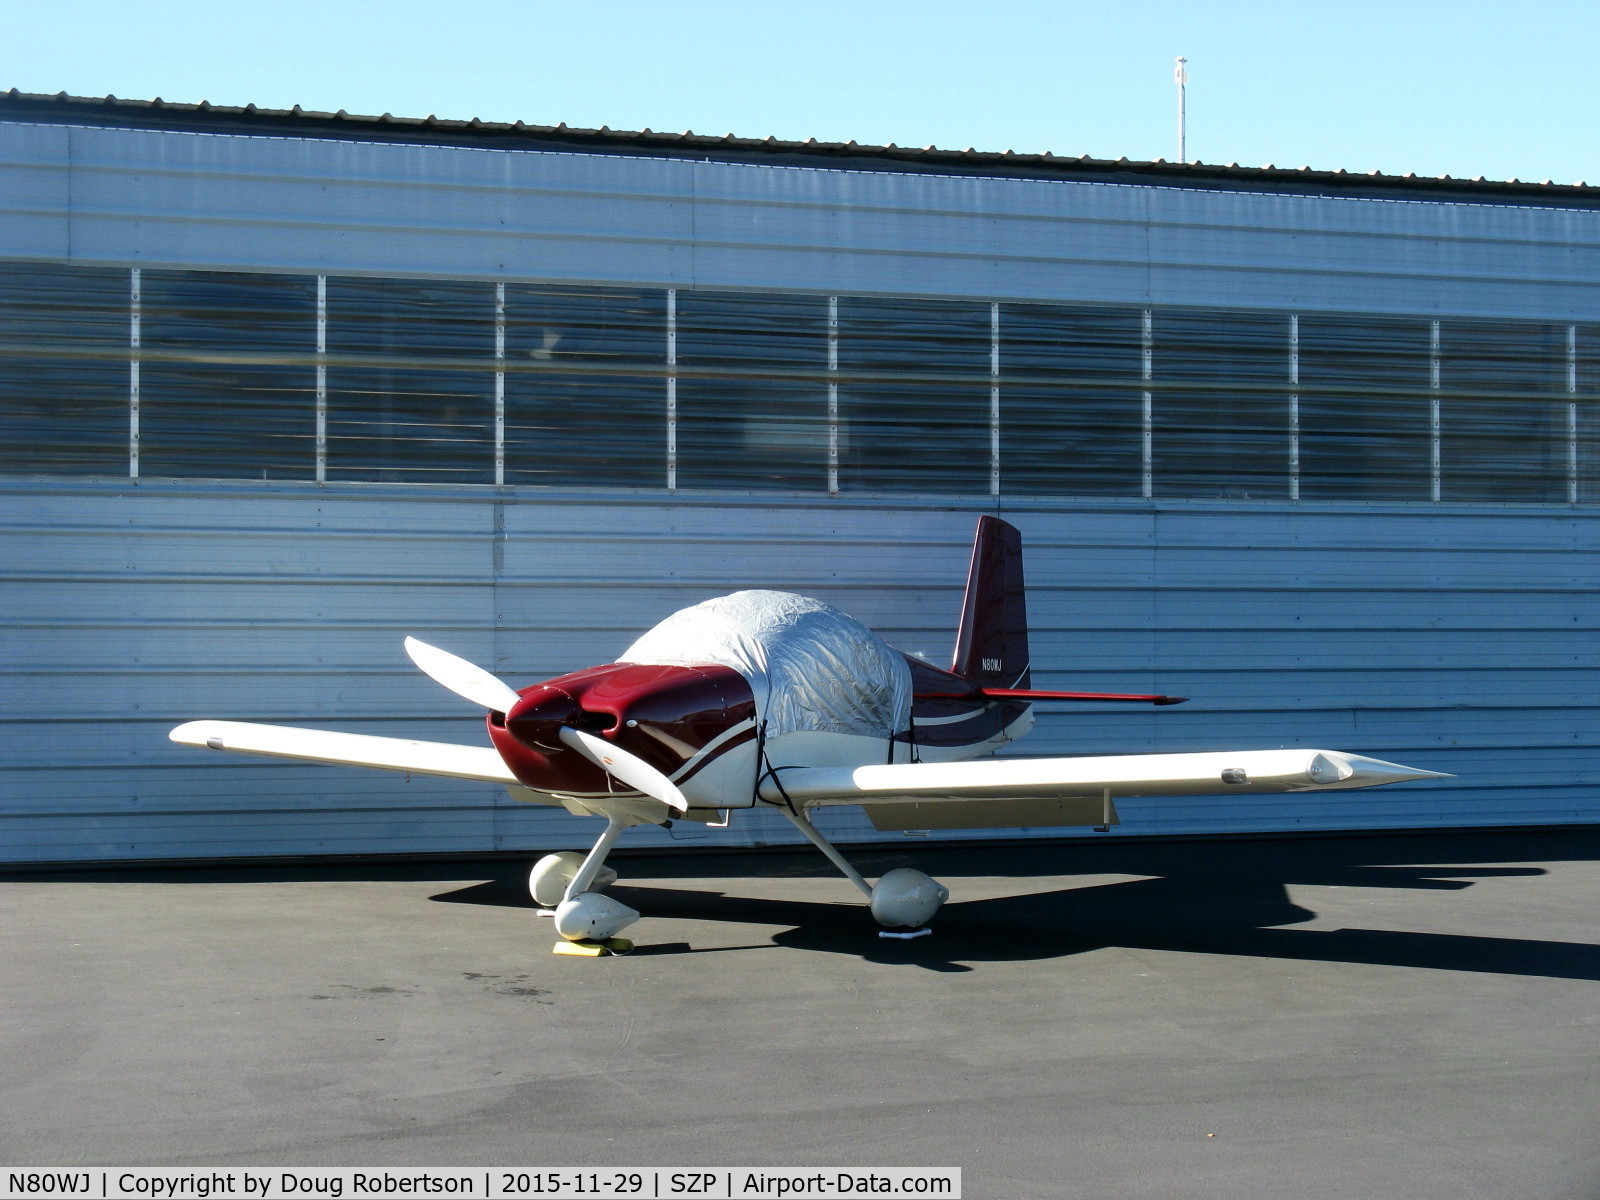 N80WJ, 2014 Vans RV-7A C/N 72575, 2015 Richmond VAN's RV-7A, ECI TITAN IOX-360-A4H1N 191 hp fuel-injected engine